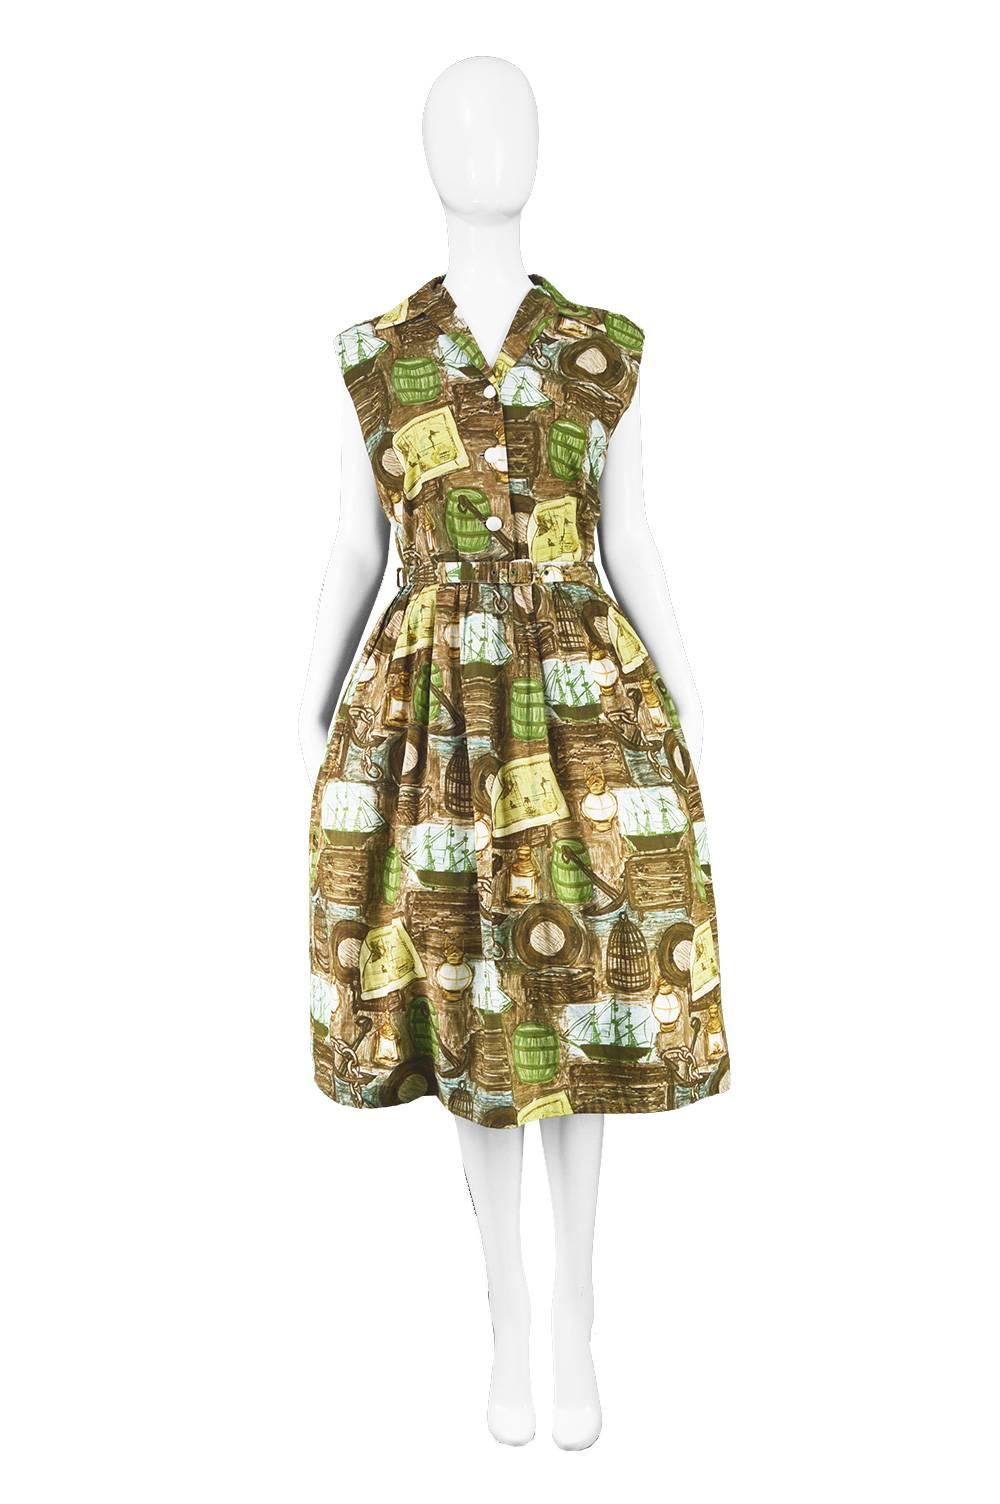 Vintage 1950s Novelty Print Nautical Theme Brown & Green Cotton Shirtdress

Estimated Size: UK 12/ US 8/ EU 40. Please check measurements. 
Bust - 40” / 101cm
Waist - 30” / 76cm
Hips - Label says to fit 40” / 101cm but really free size
Length